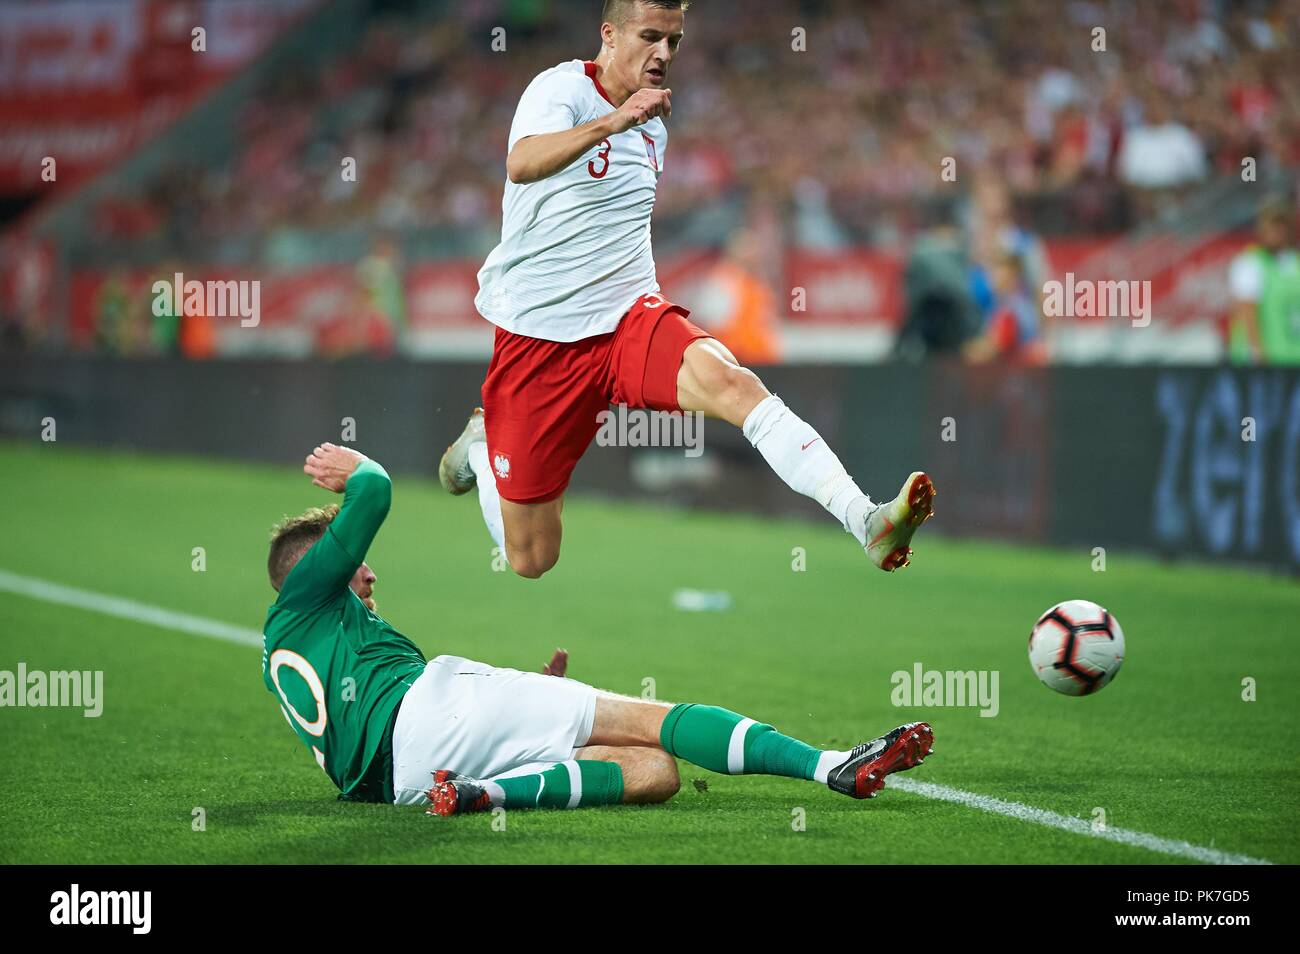 Wroclaw, Poland. 11th September 2018. Friendly game Poland v Republic of Ireland on September 11, 2018 in Wroclaw, Poland. In the picture: Richard Keogh, Arkadiusz Reca Credit: East News sp. z o.o./Alamy Live News Stock Photo